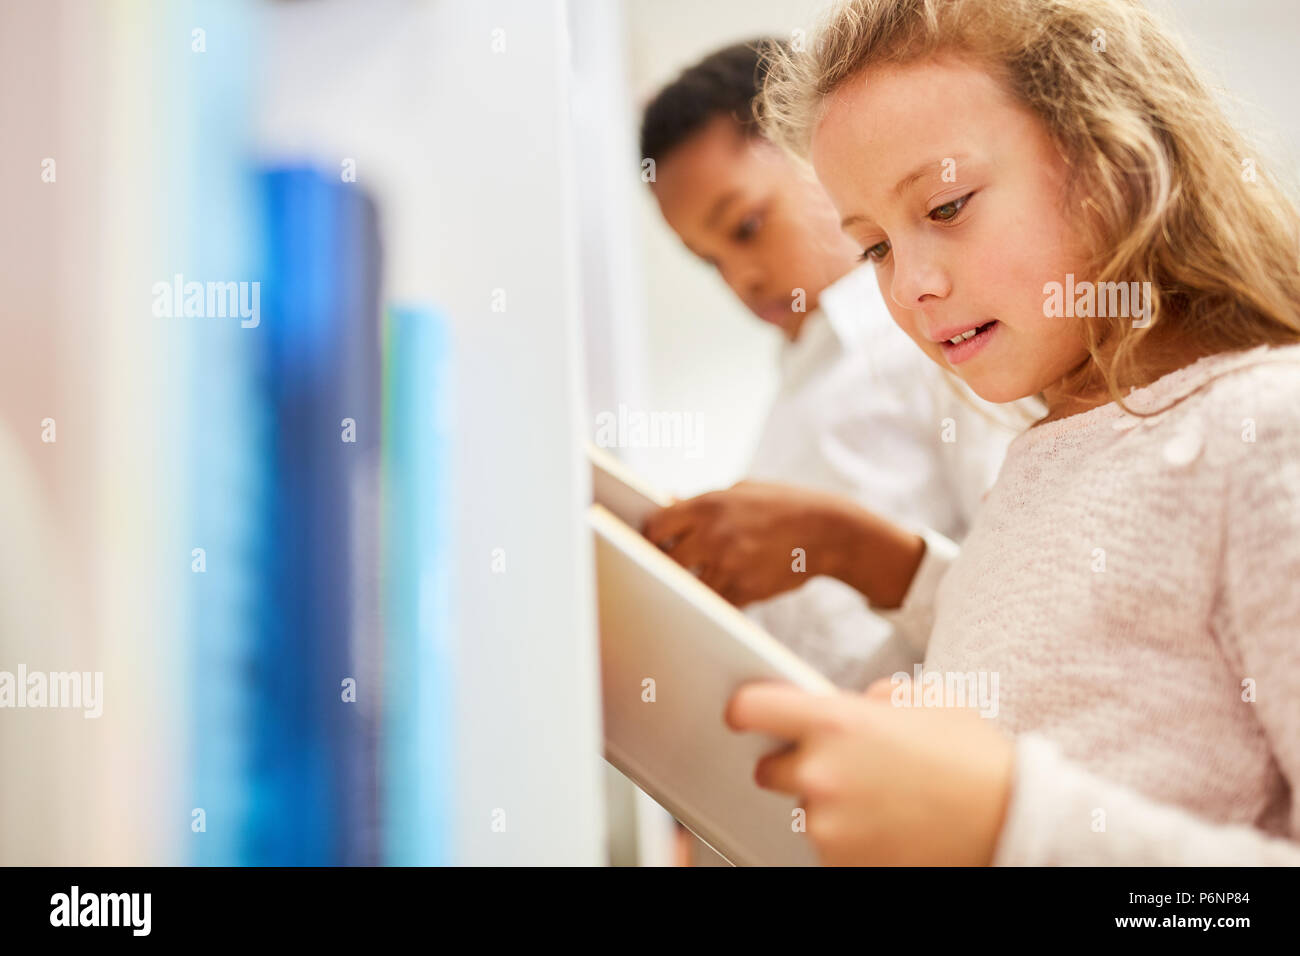 Children in elementary school reading and researching in books Stock Photo